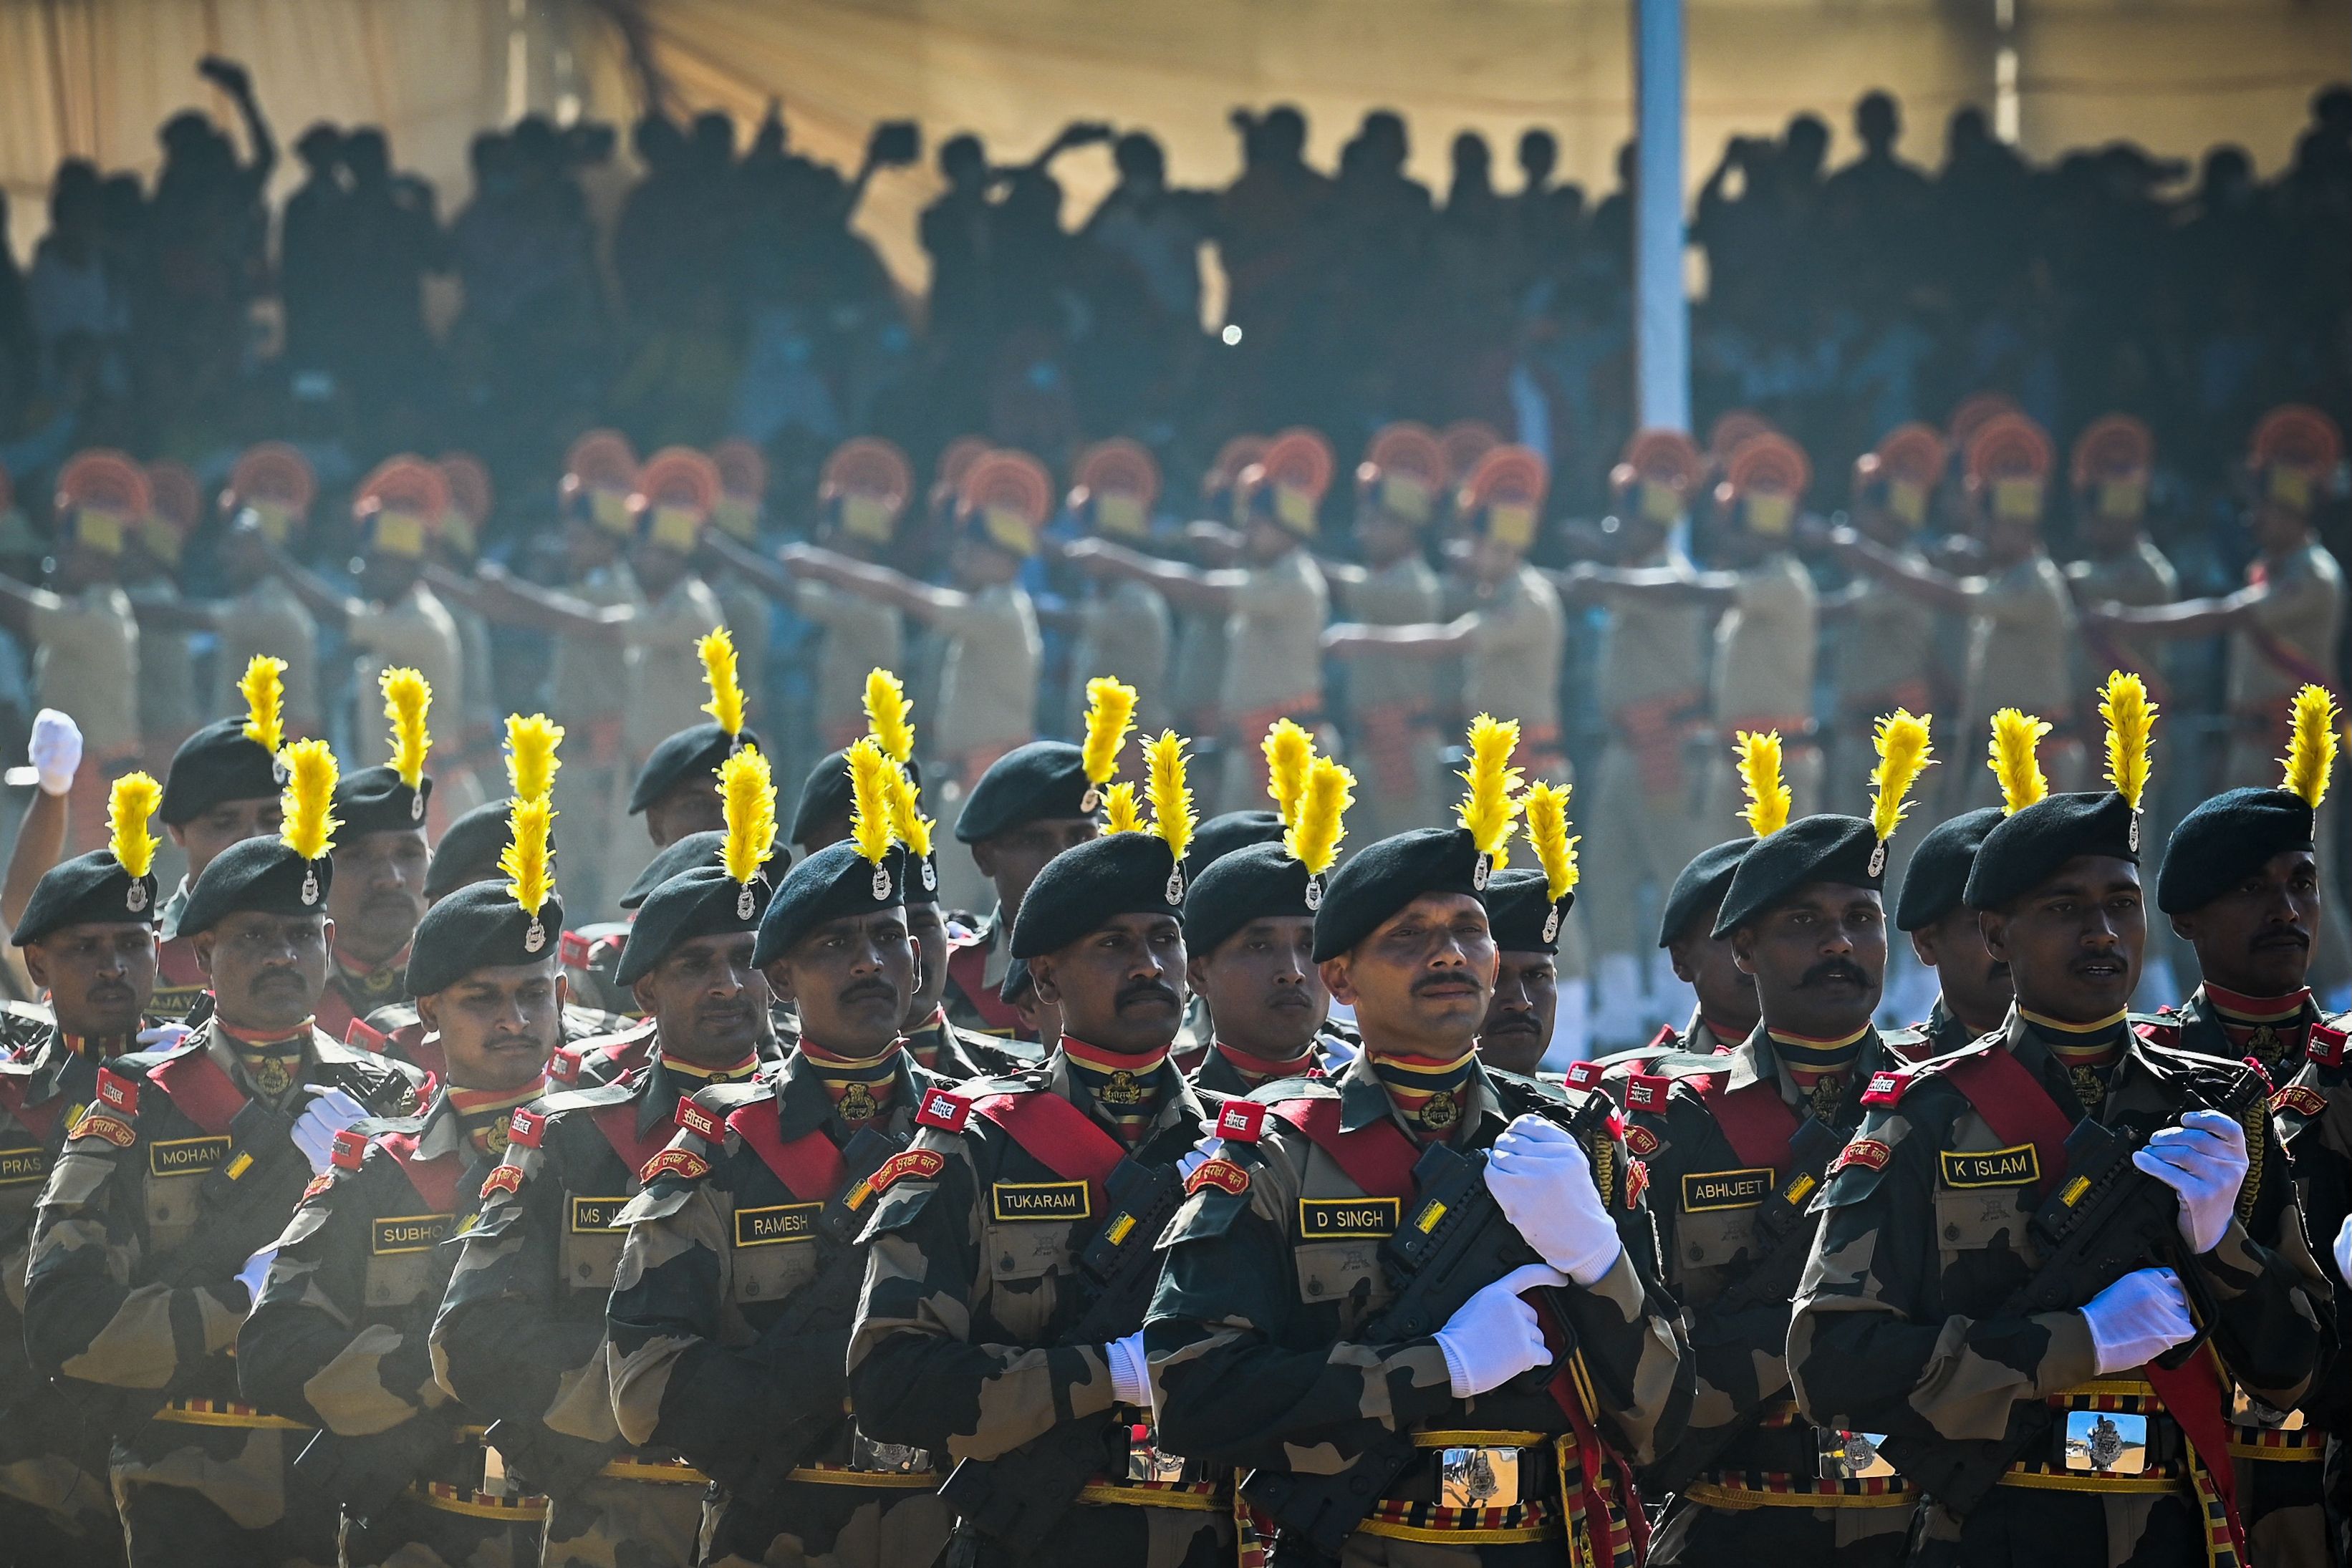 Personnel of the Border Security Force (BSF) march during the parade. — AFP